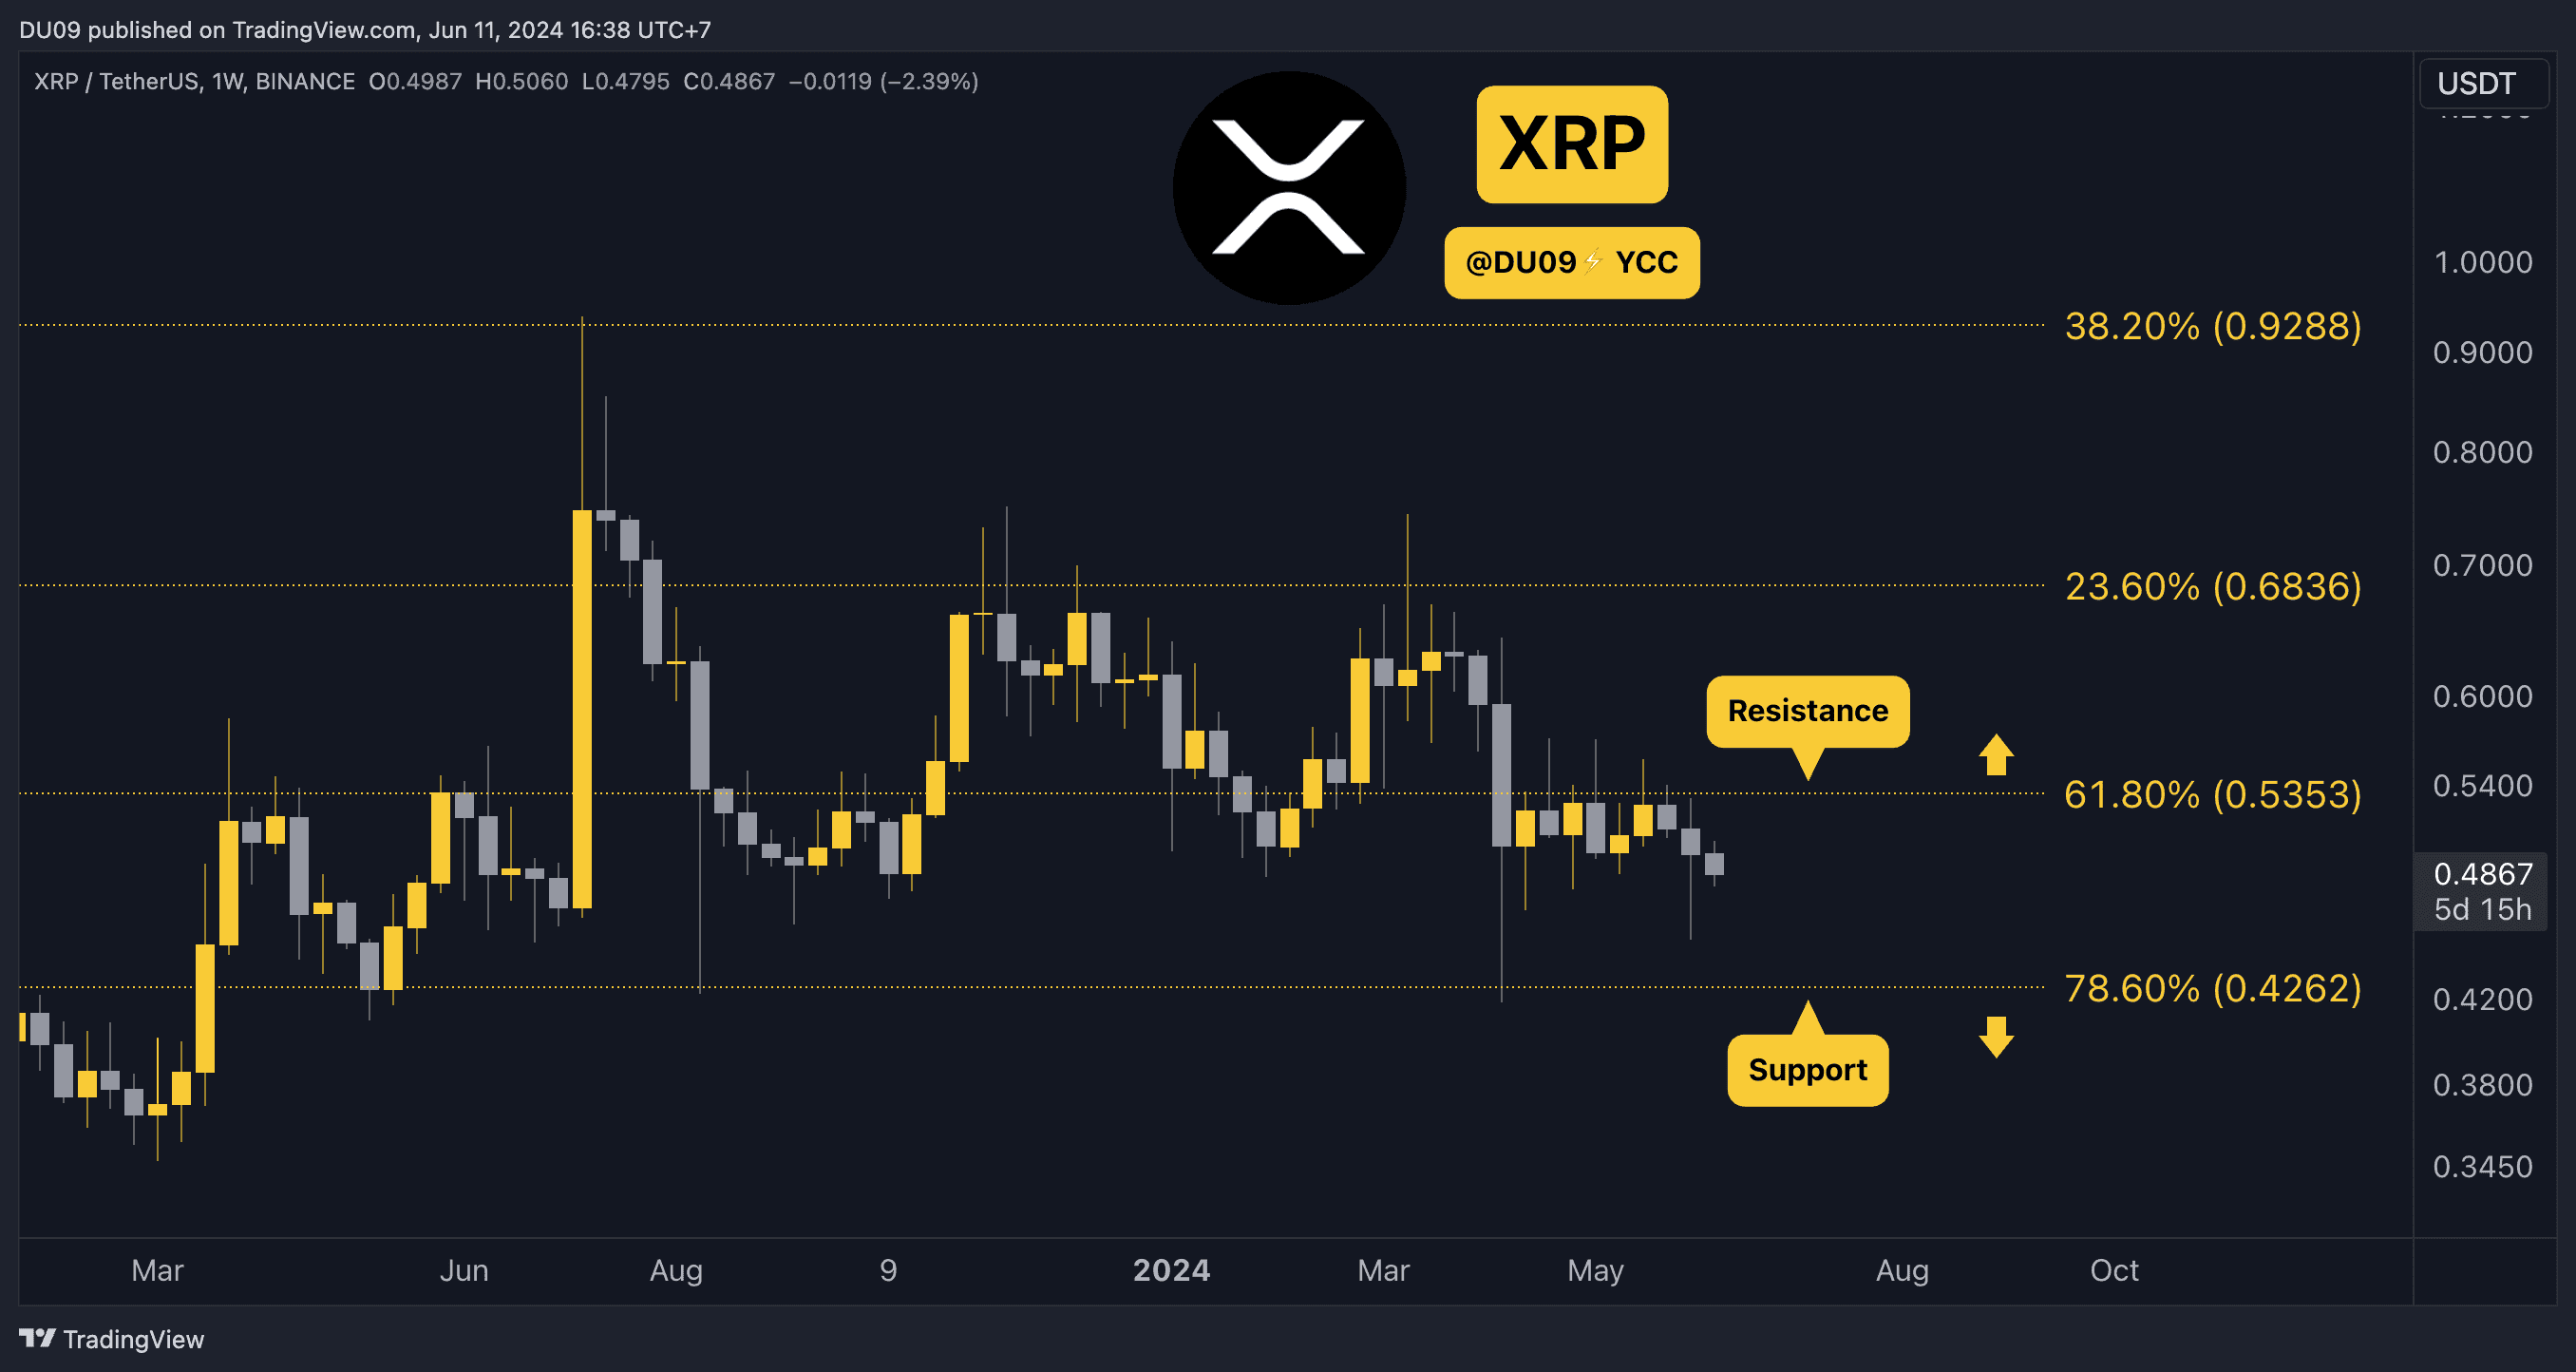 Why-is-the-xrp-price-down-today?